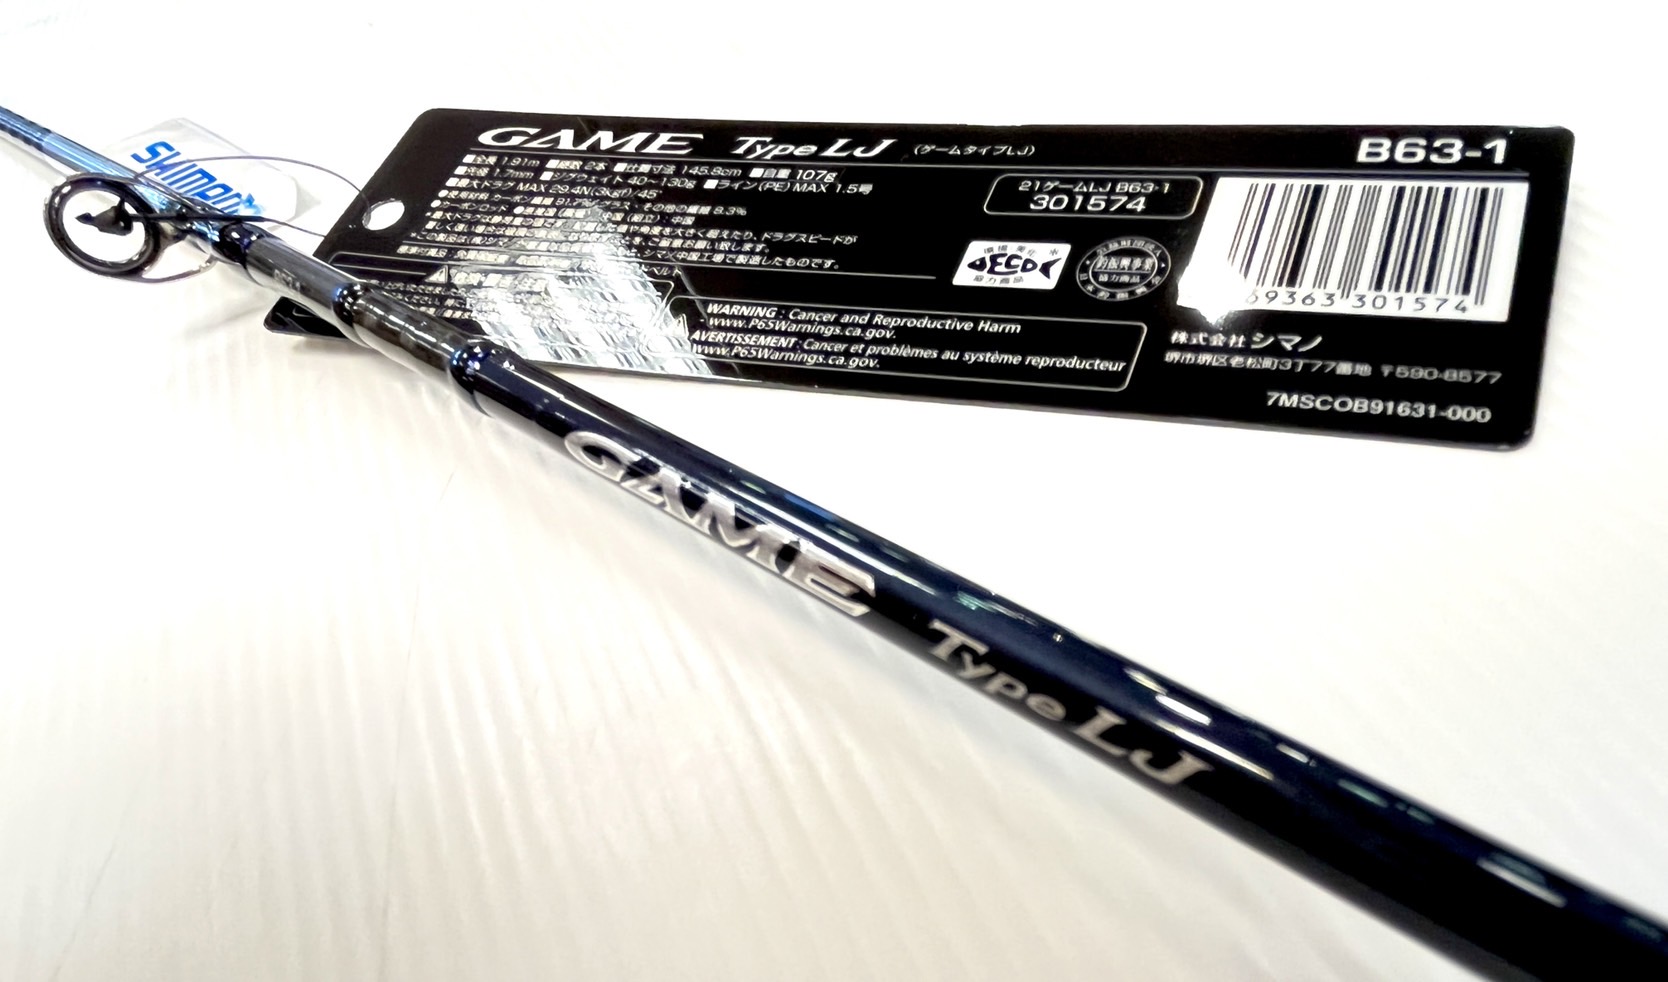 NEW ROD SHIMANO GAME TYPE LJ B63-1 | Rod | Tackle Berry